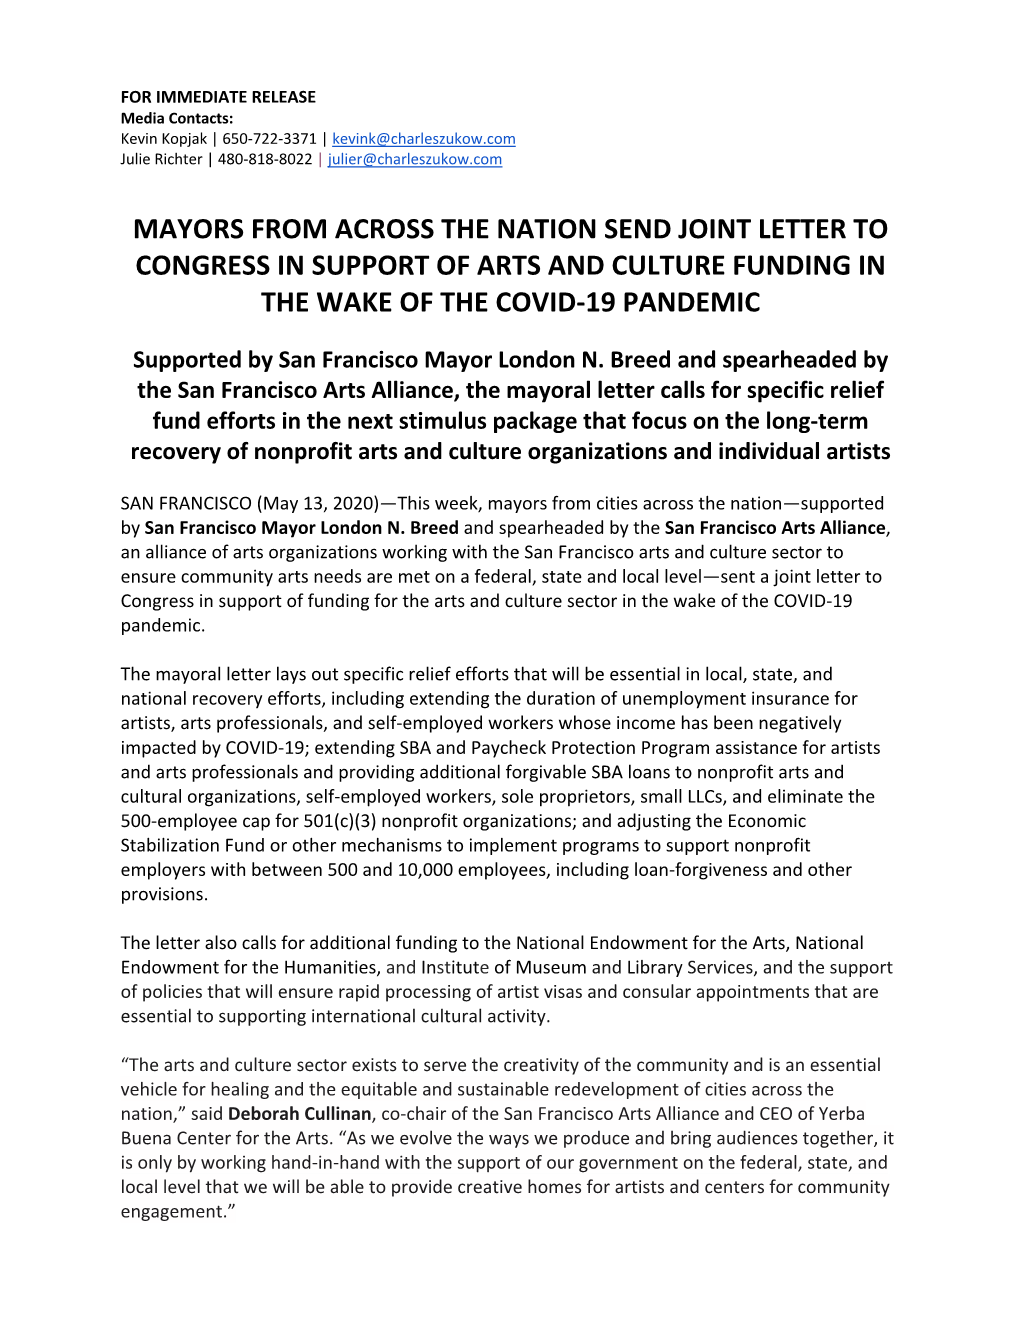 Mayors from Across the Nation Send Joint Letter to Congress in Support of Arts and Culture Funding in the Wake of the Covid-19 Pandemic